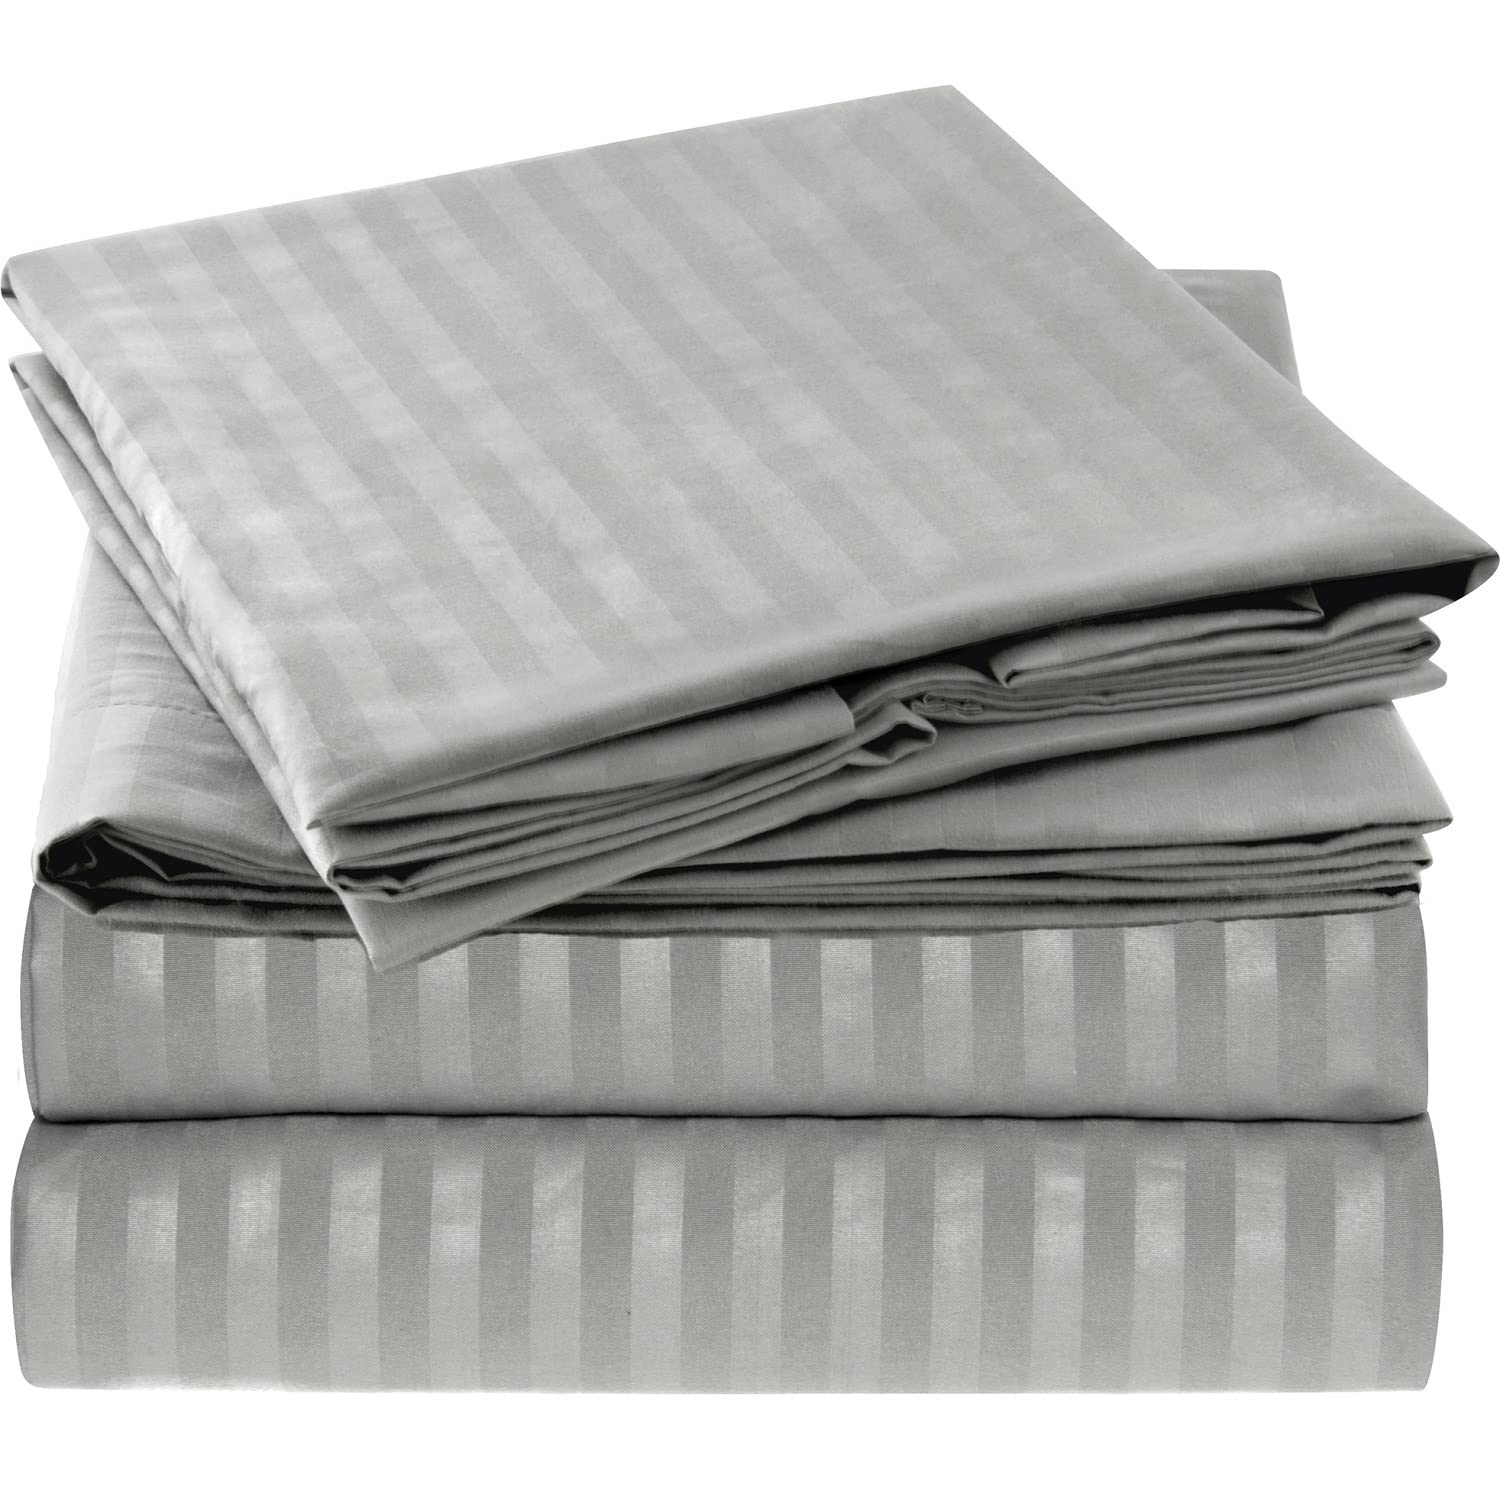 Book Cover Mellanni Twin Sheet Set - Kids Twin Sheets - Hotel Luxury 1800 Bedding Sheets & Pillowcases - Extra Soft Cooling Bed Sheets - Wrinkle, Fade, Stain Resistant - 3 PC (Twin, Striped - Gray / Silver)